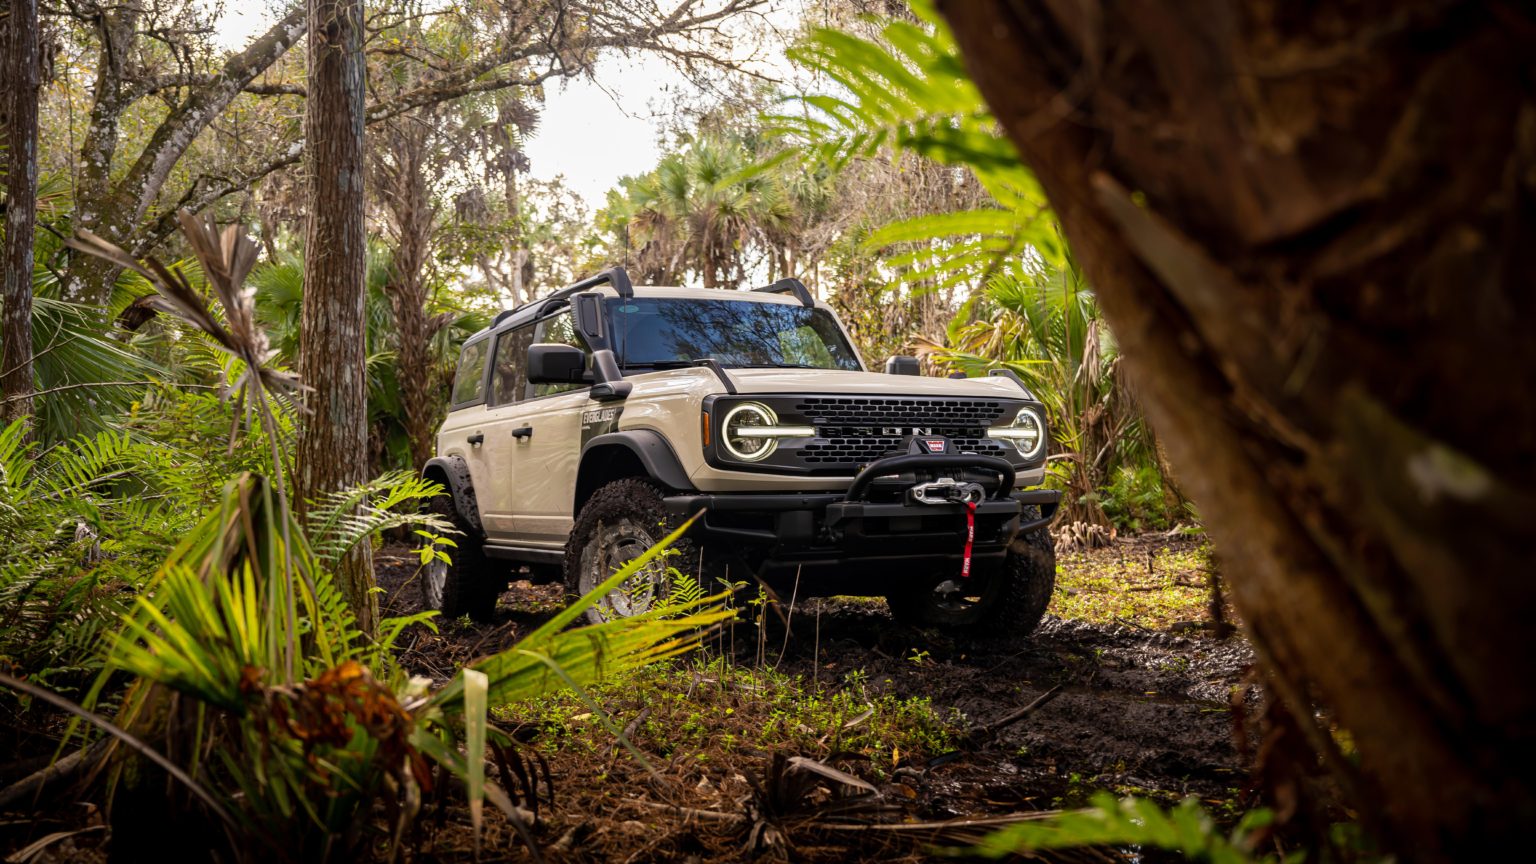 The Everglades adds off-road upgrades to the already rugged Bronco.